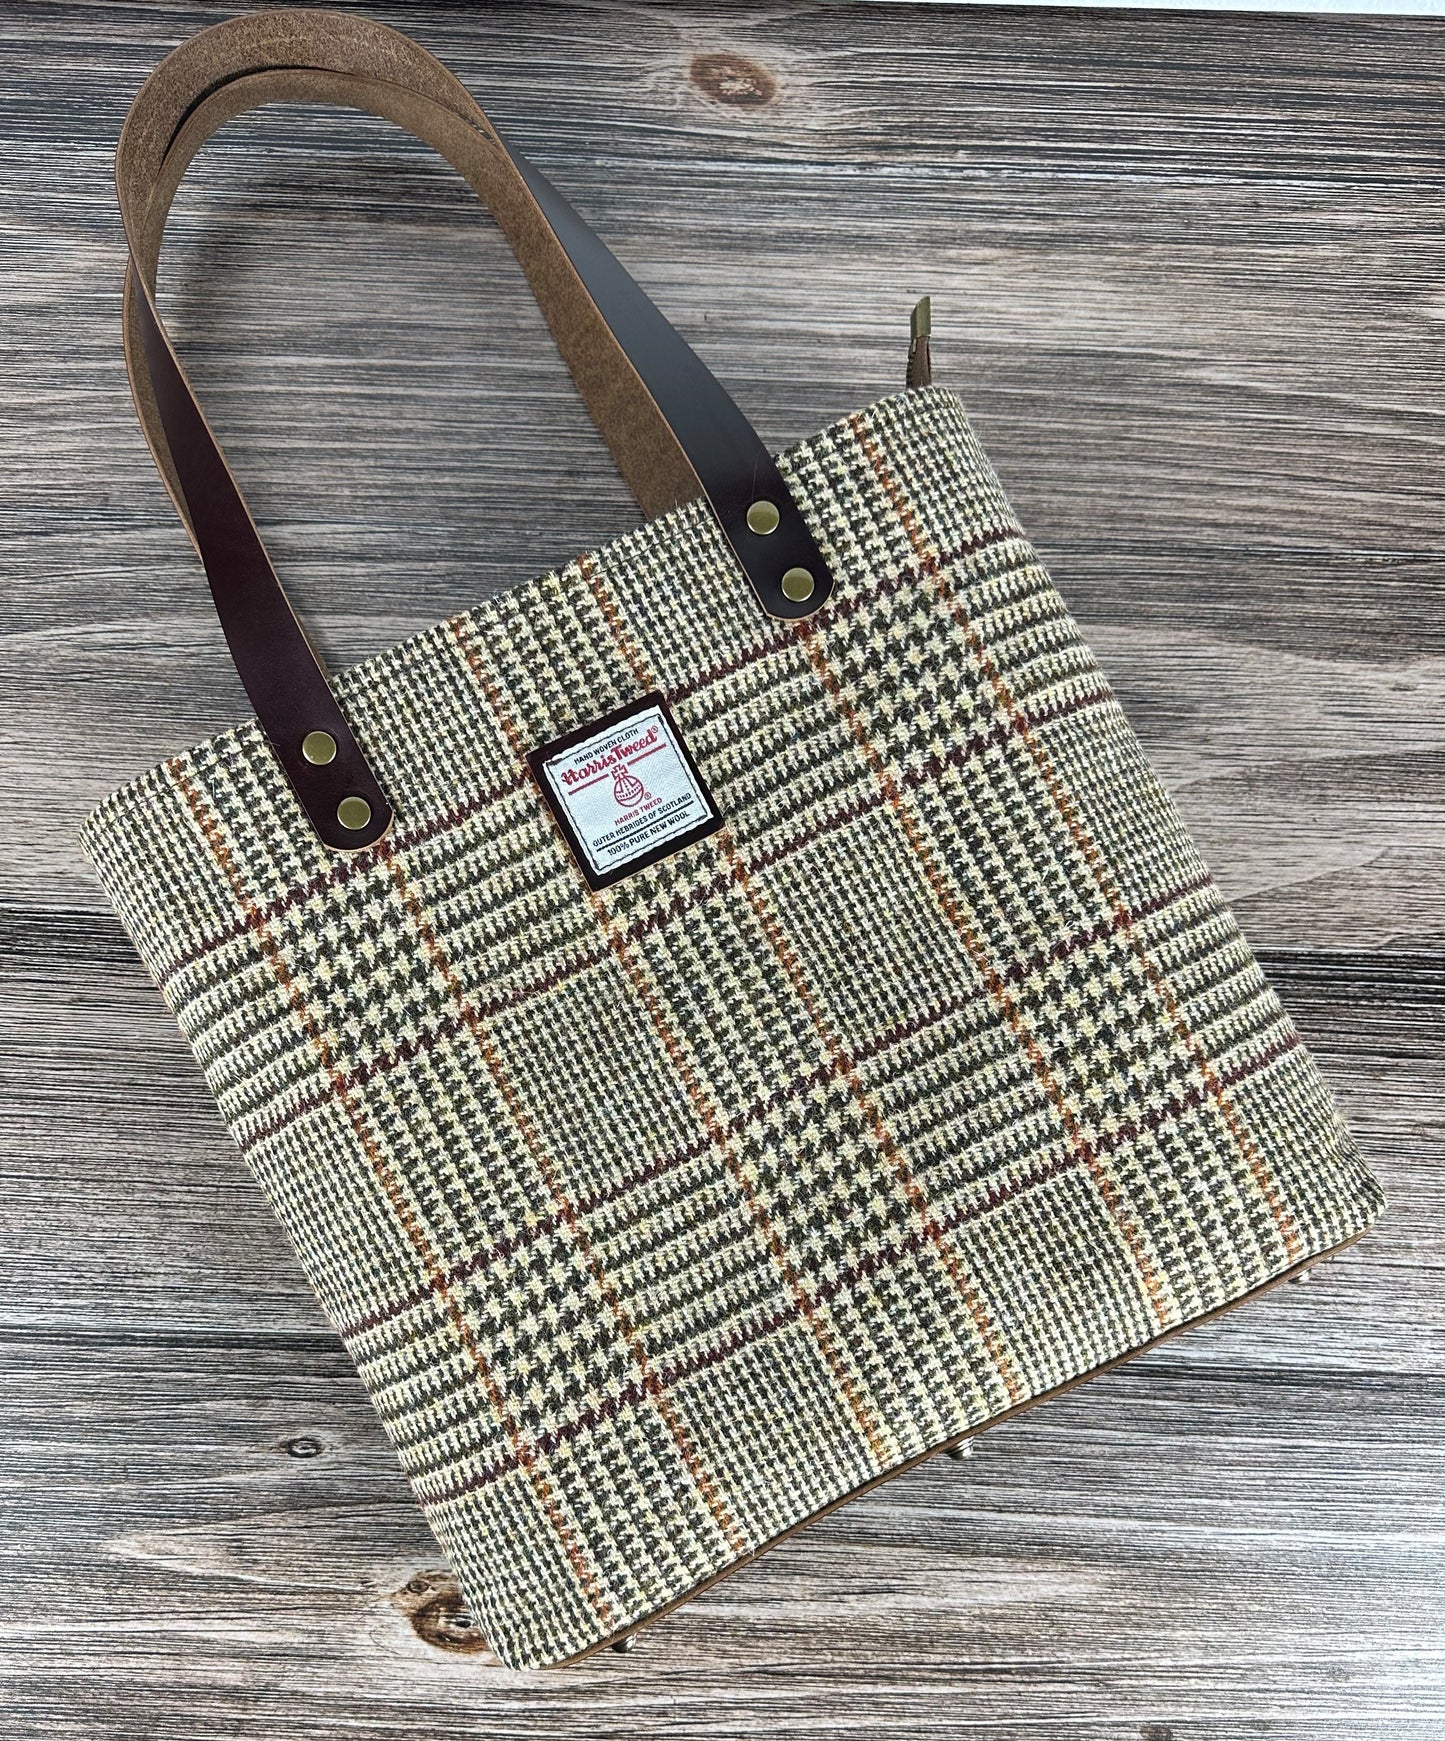 Classic Glen Plaid with Cognac Leather Antique Brass Hardware Harris Tweed® Commuter Tote SquiresCanvasCreations